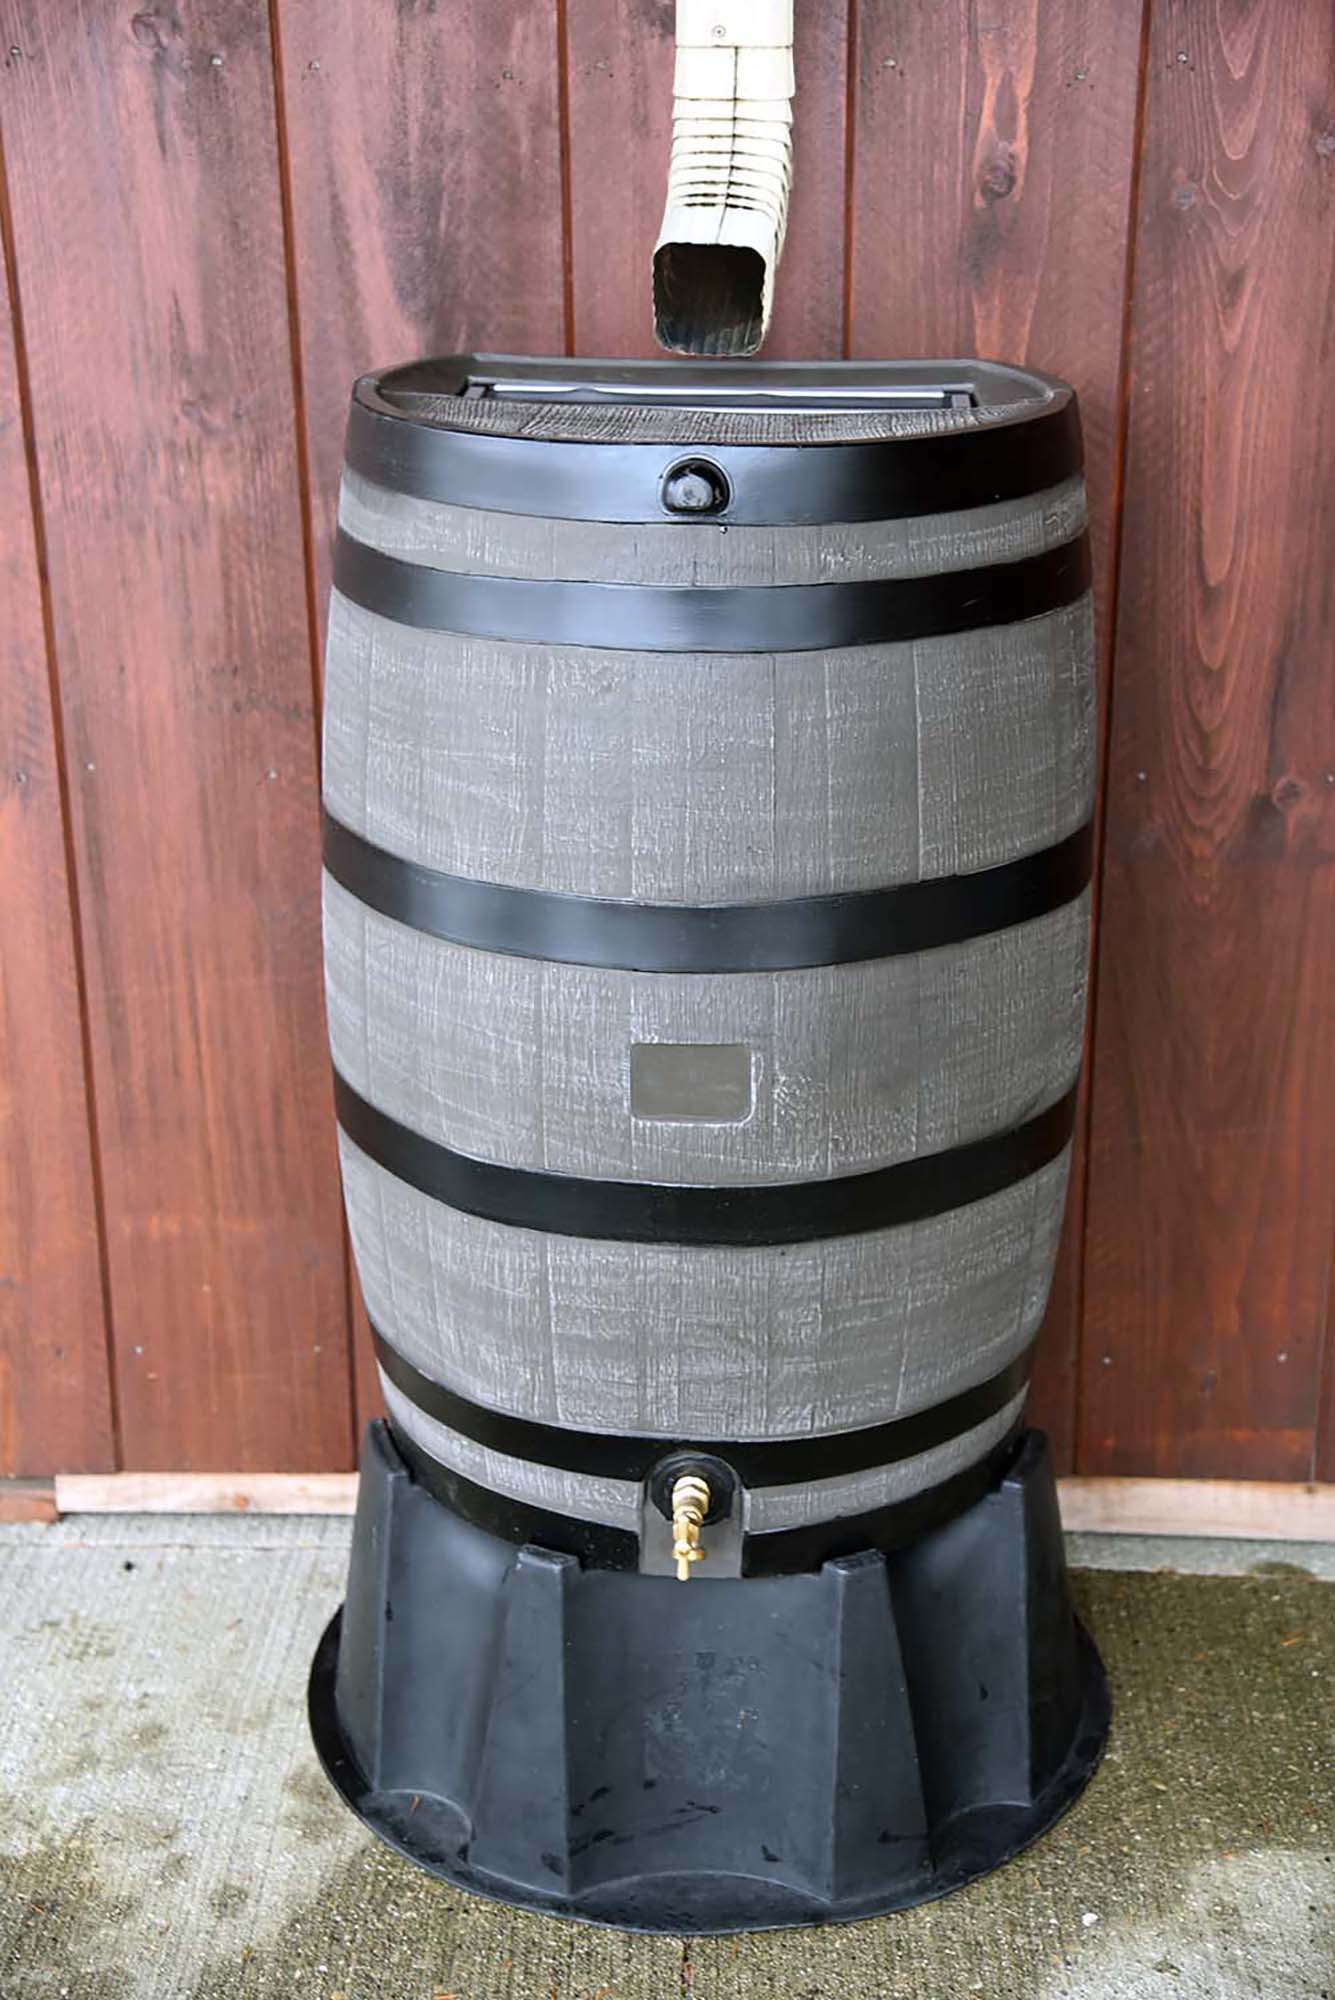 brown with black stripes flat back rain barrel on black stand with wood background